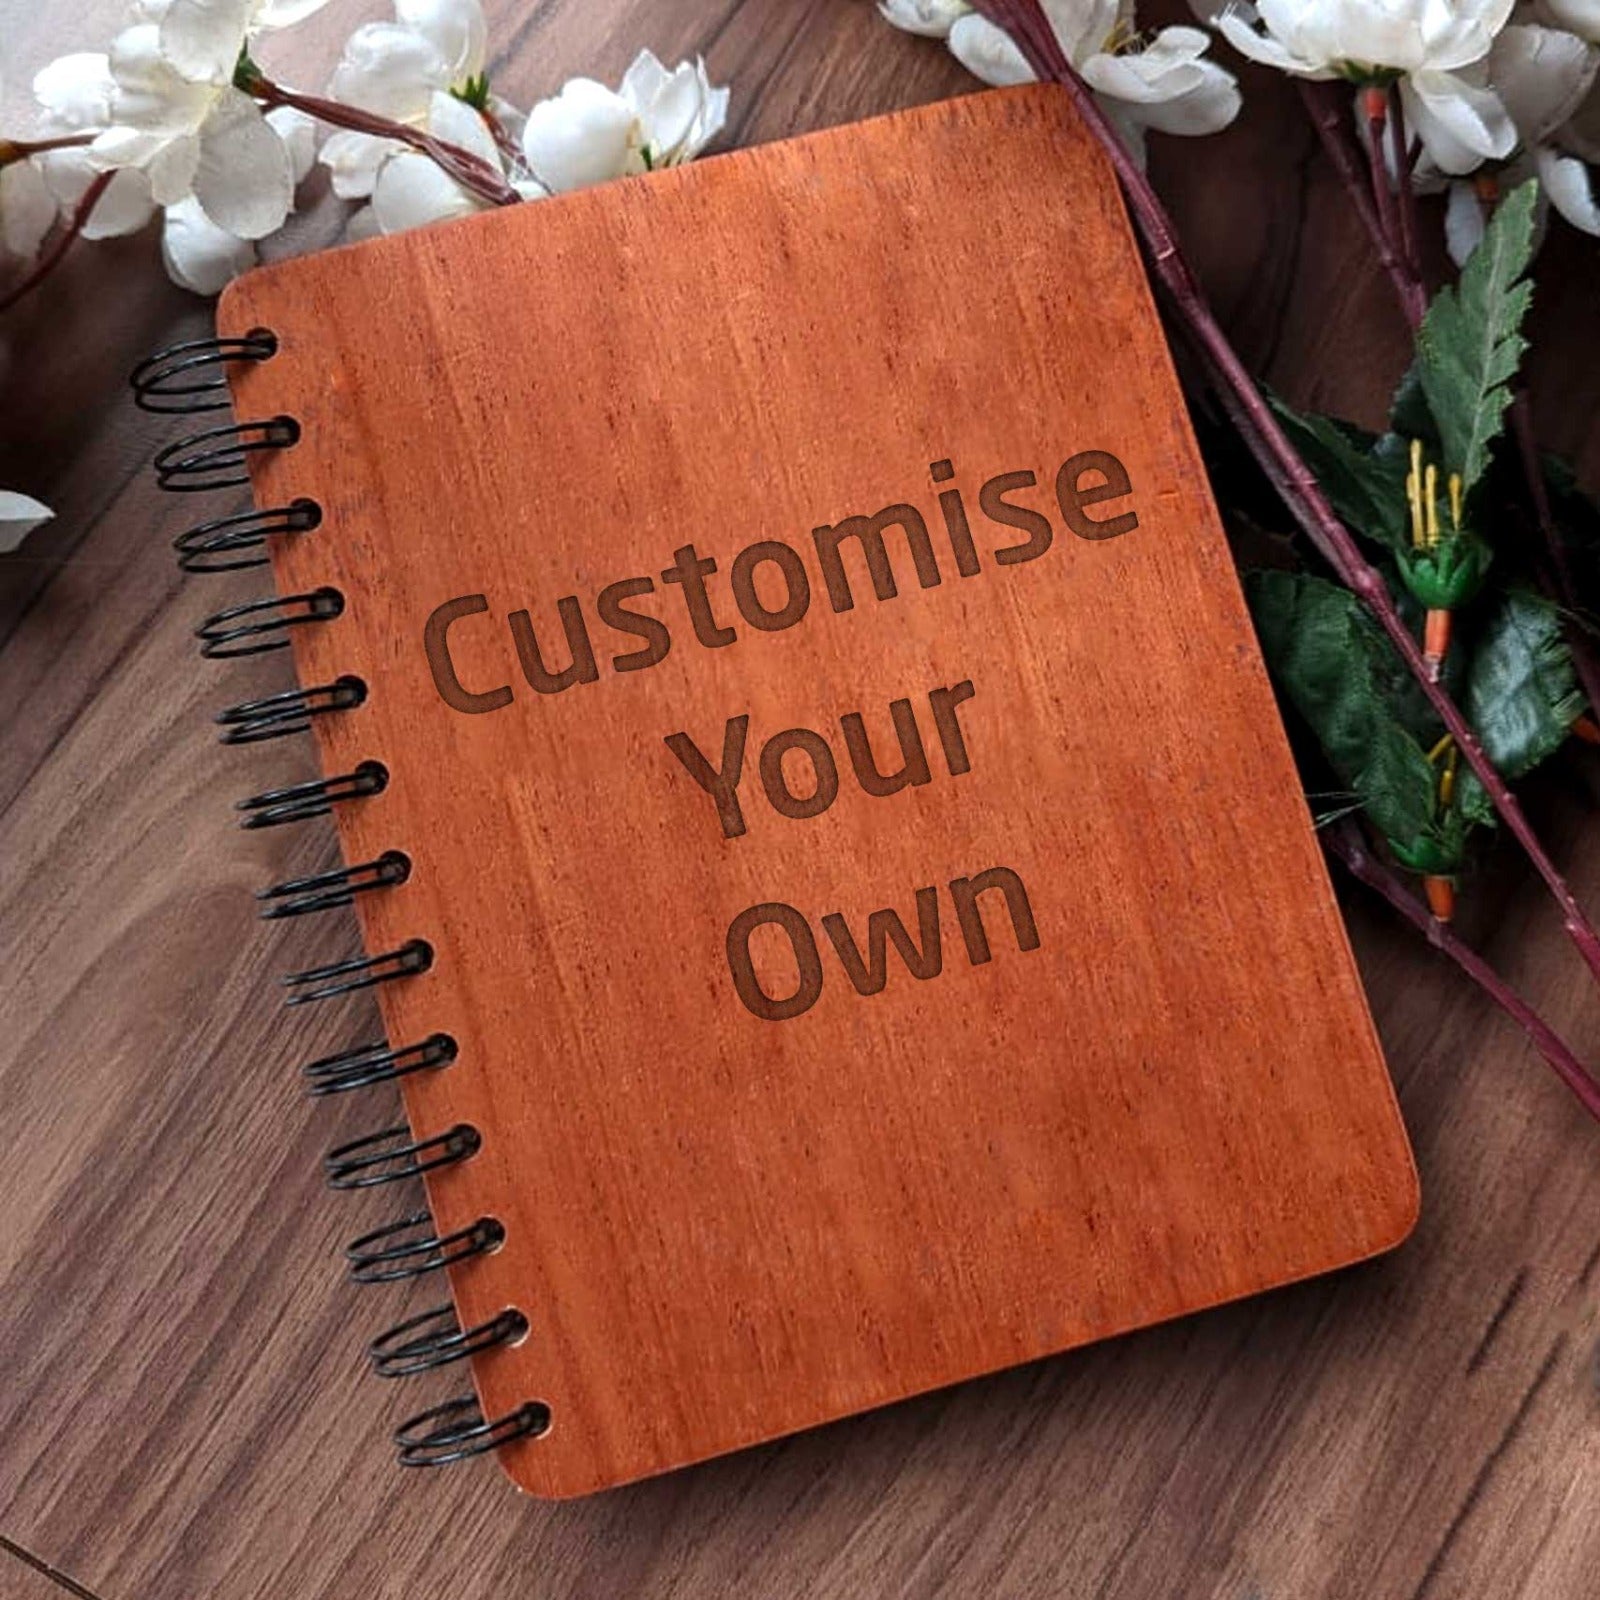 Personalized Wooden Notebook - Notebook Journal - Customize Your Own Notebook With A Photo And Personal Message - Photo Gifts - Photo On Wood - Woodgeek Store